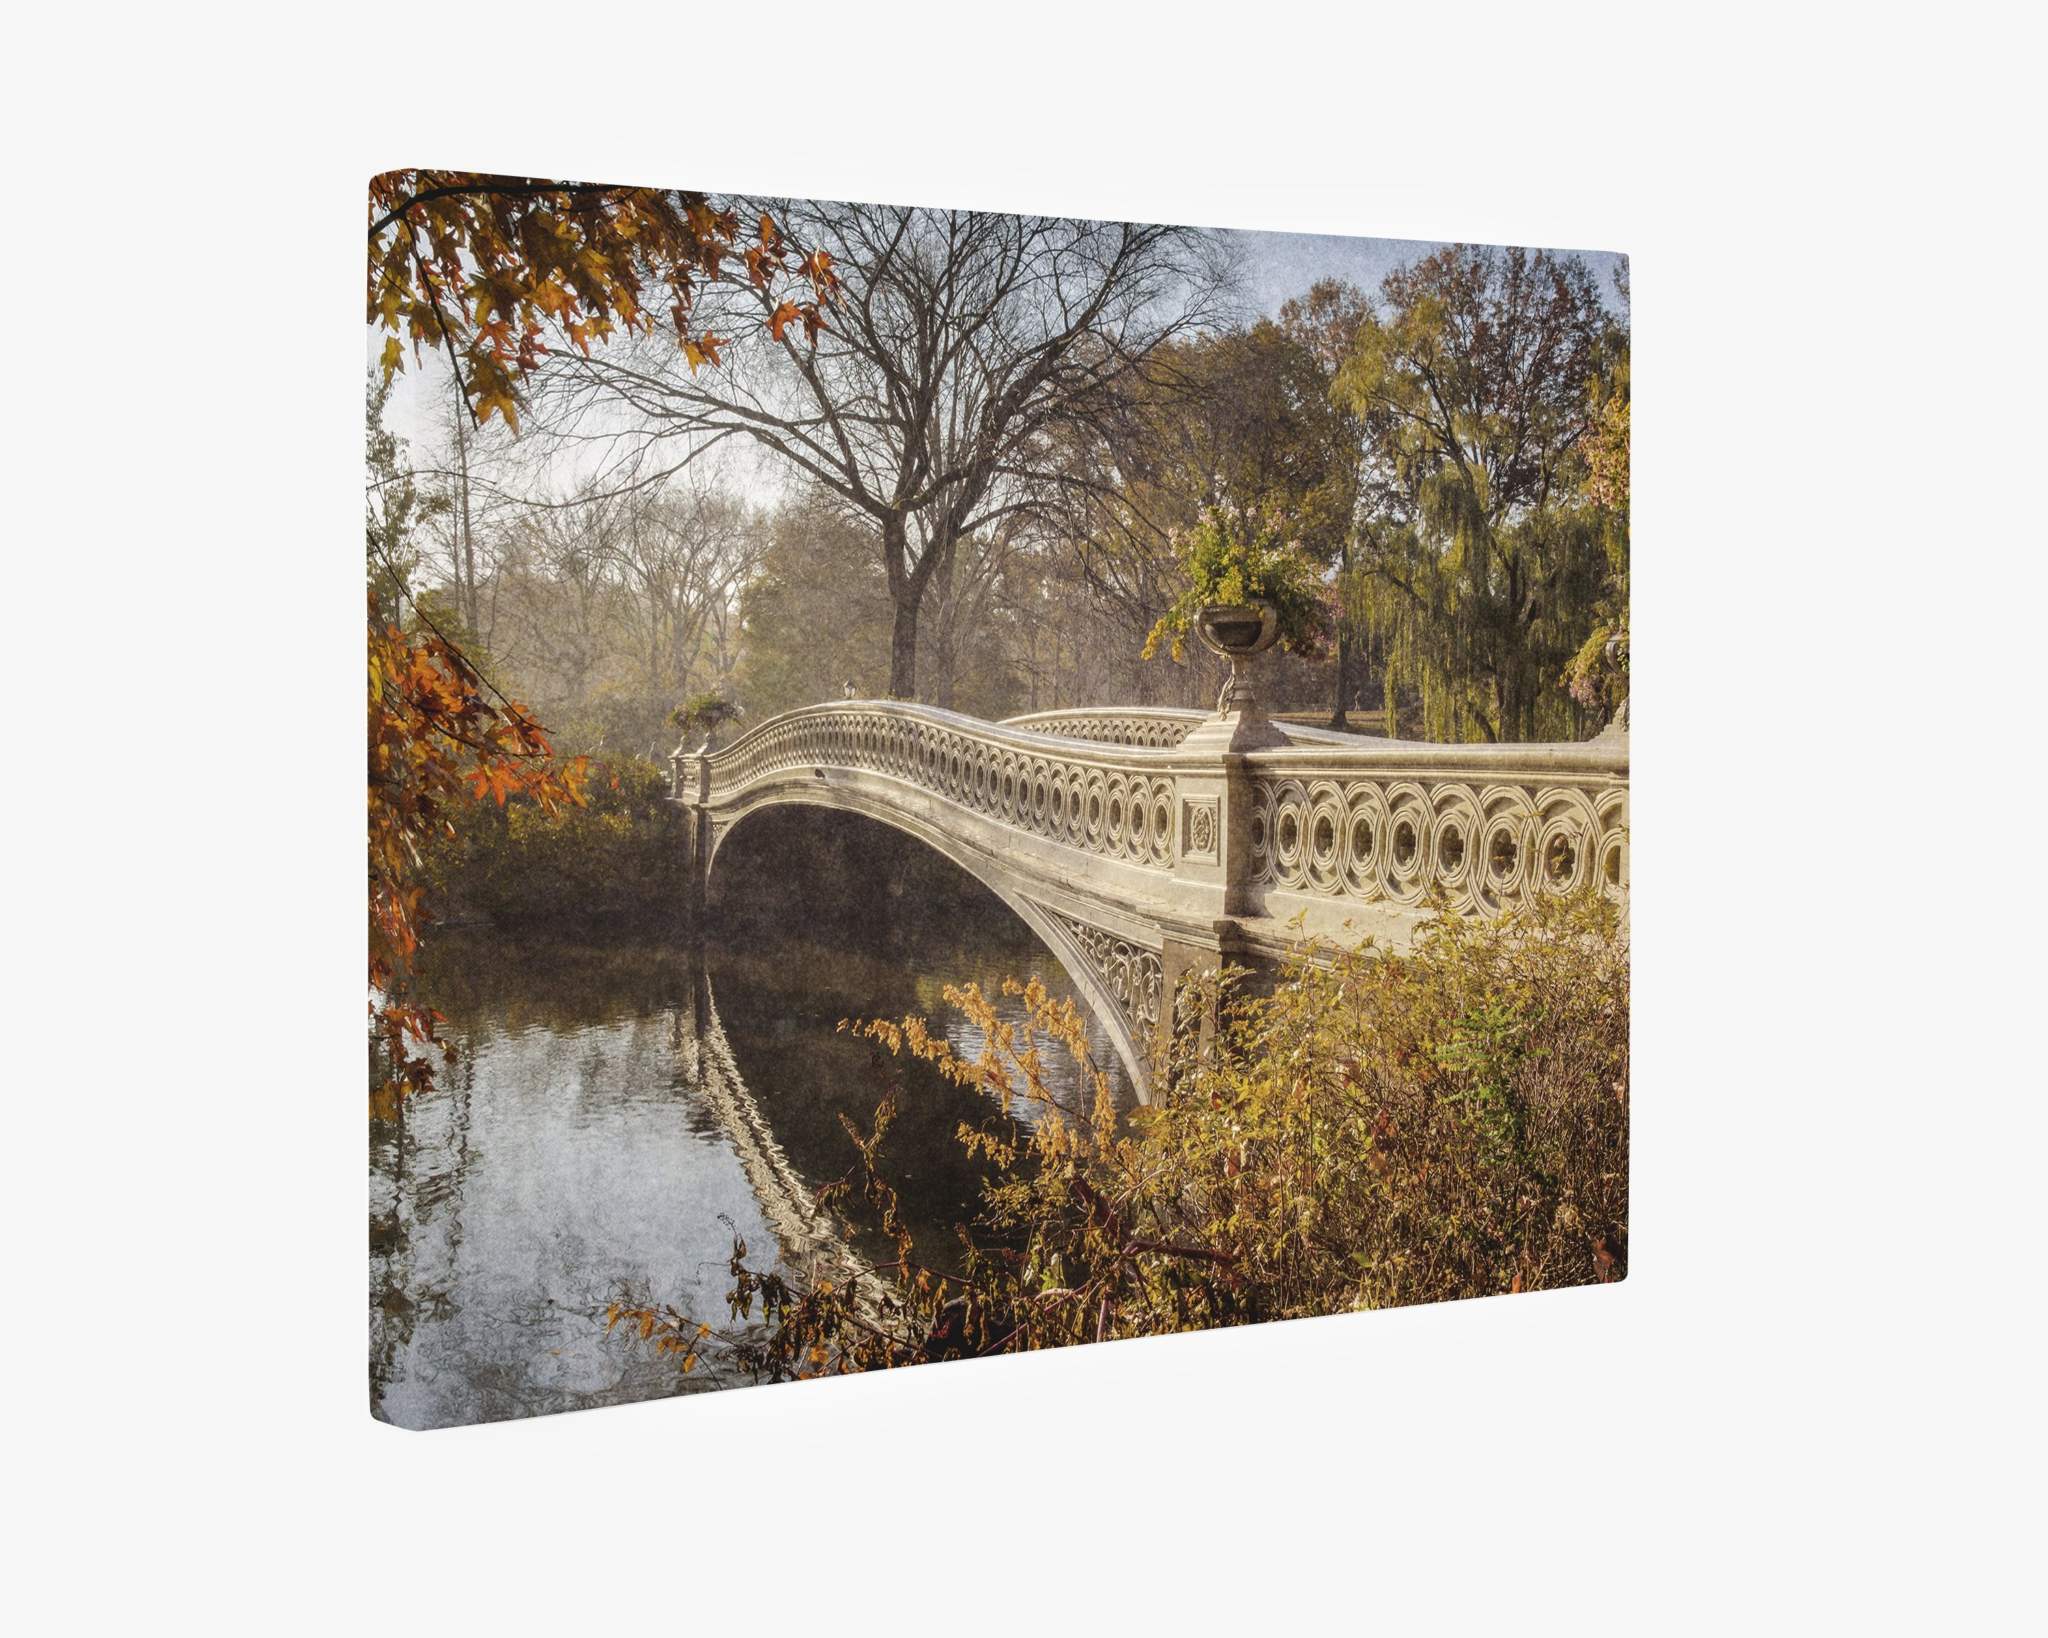 A view of the Bow Bridge in Central Park during autumn showcases the ornate, arched structure adorned with planters, spanning over a calm body of water. Surrounded by colorful fall foliage in shades of orange, yellow, and red with bare trees in the background, it’s perfect for an Offley Green New York City Canvas Wall Art, 'Fall Bow Bridge.'